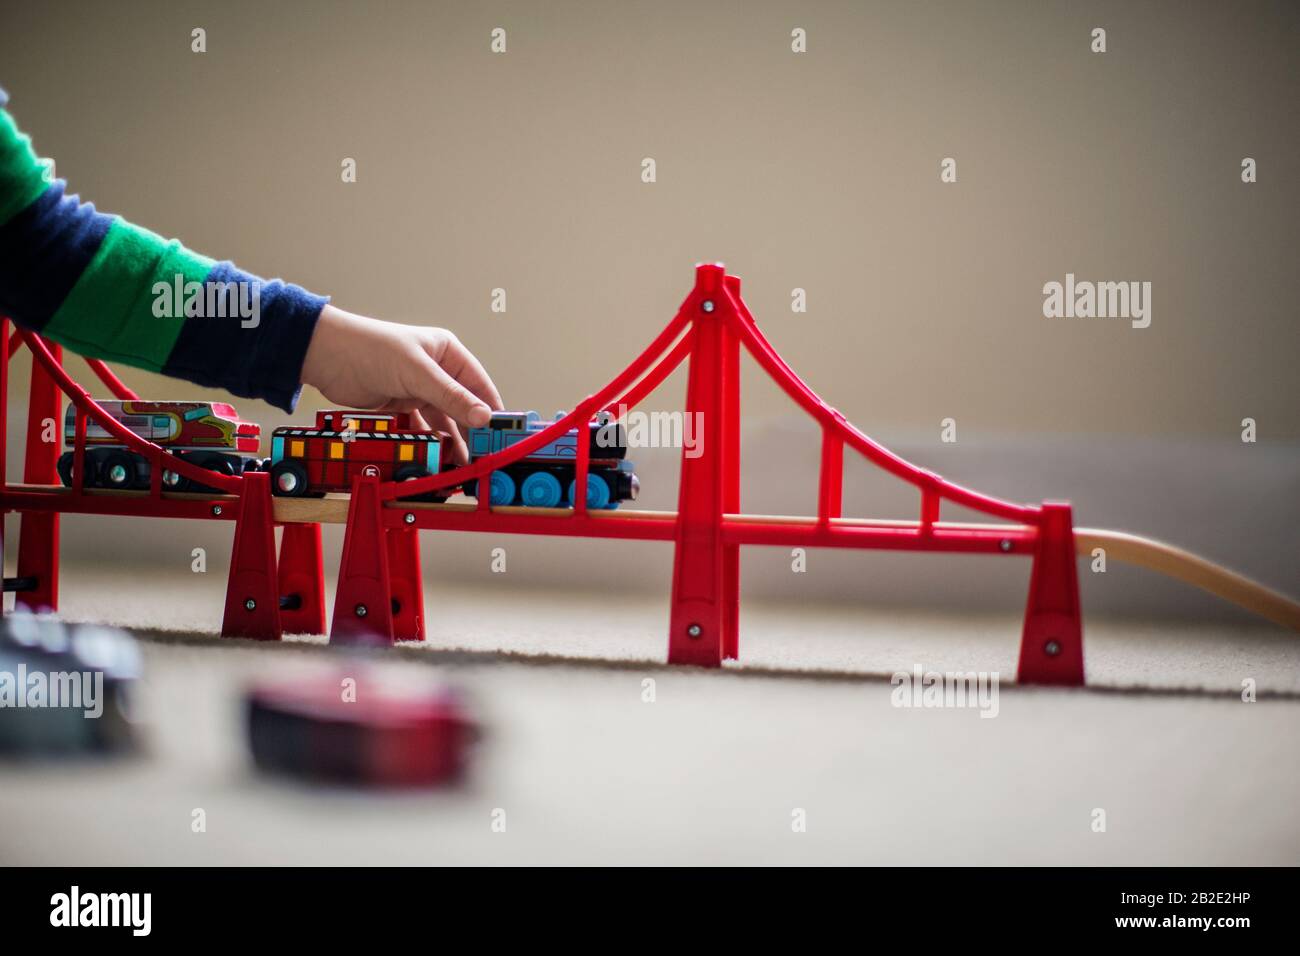 Child playing with a toy train and bridge set Stock Photo